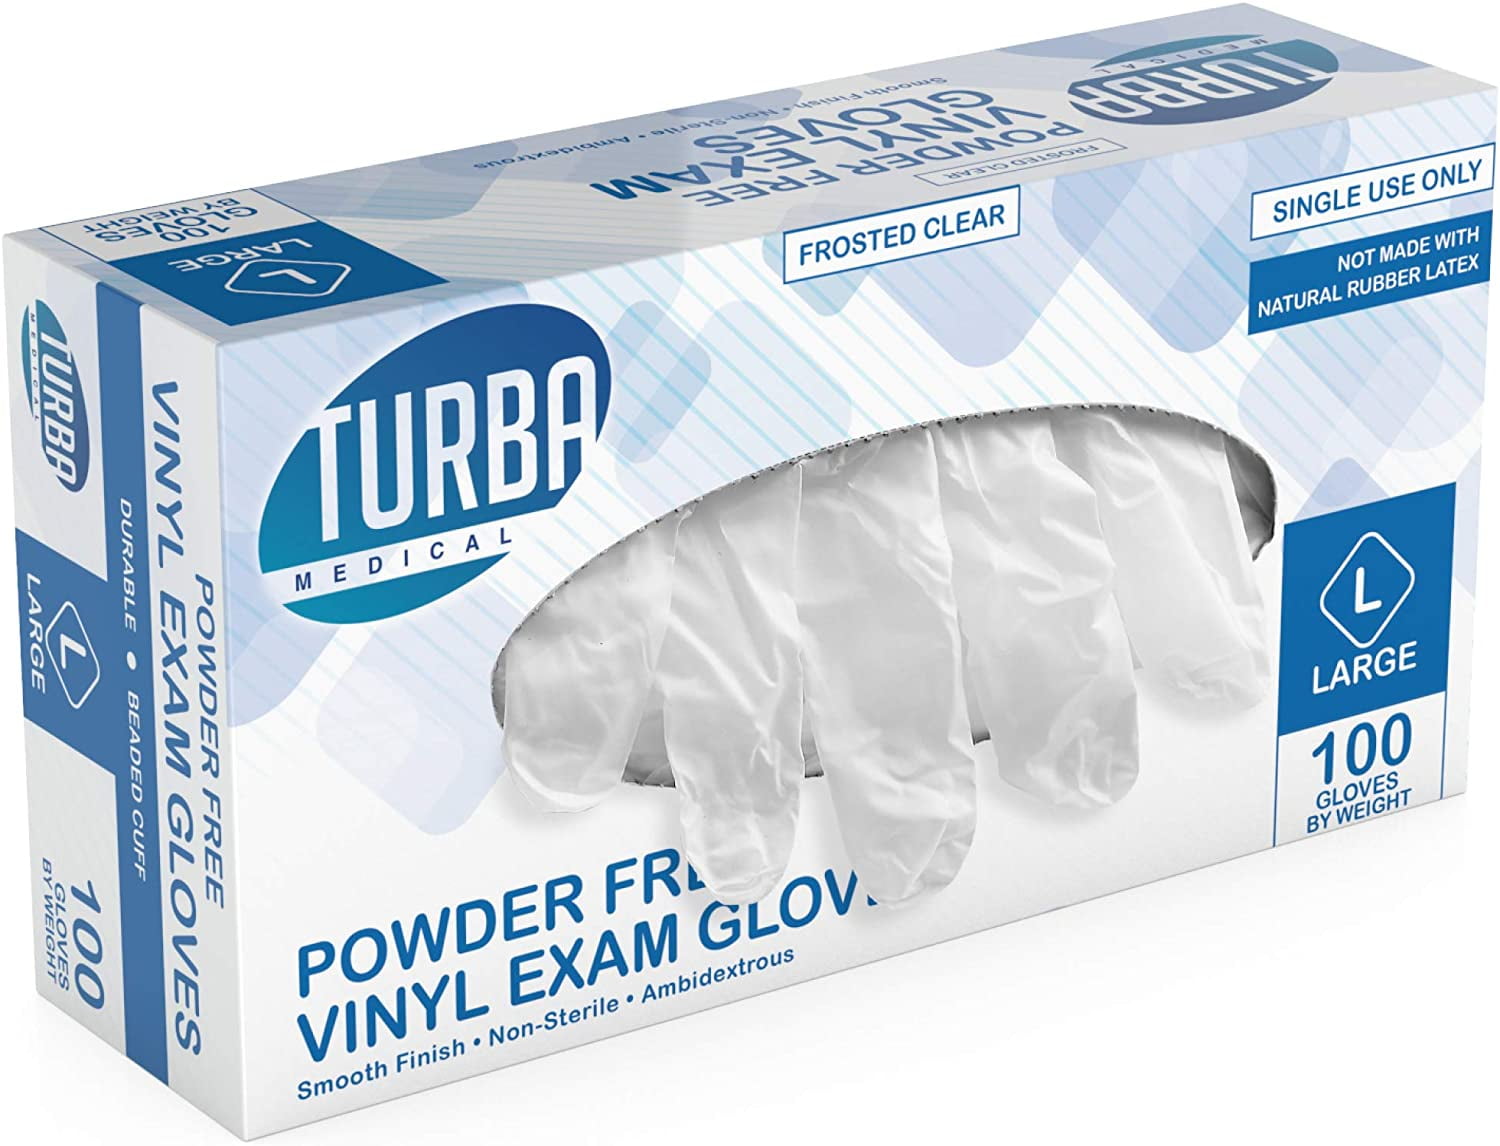 Clear Vinyl Medical Exam Gloves Disposable Vinyl Gloves Latex Free Non-Sterile for All Purposes Gloves Powder-Free 